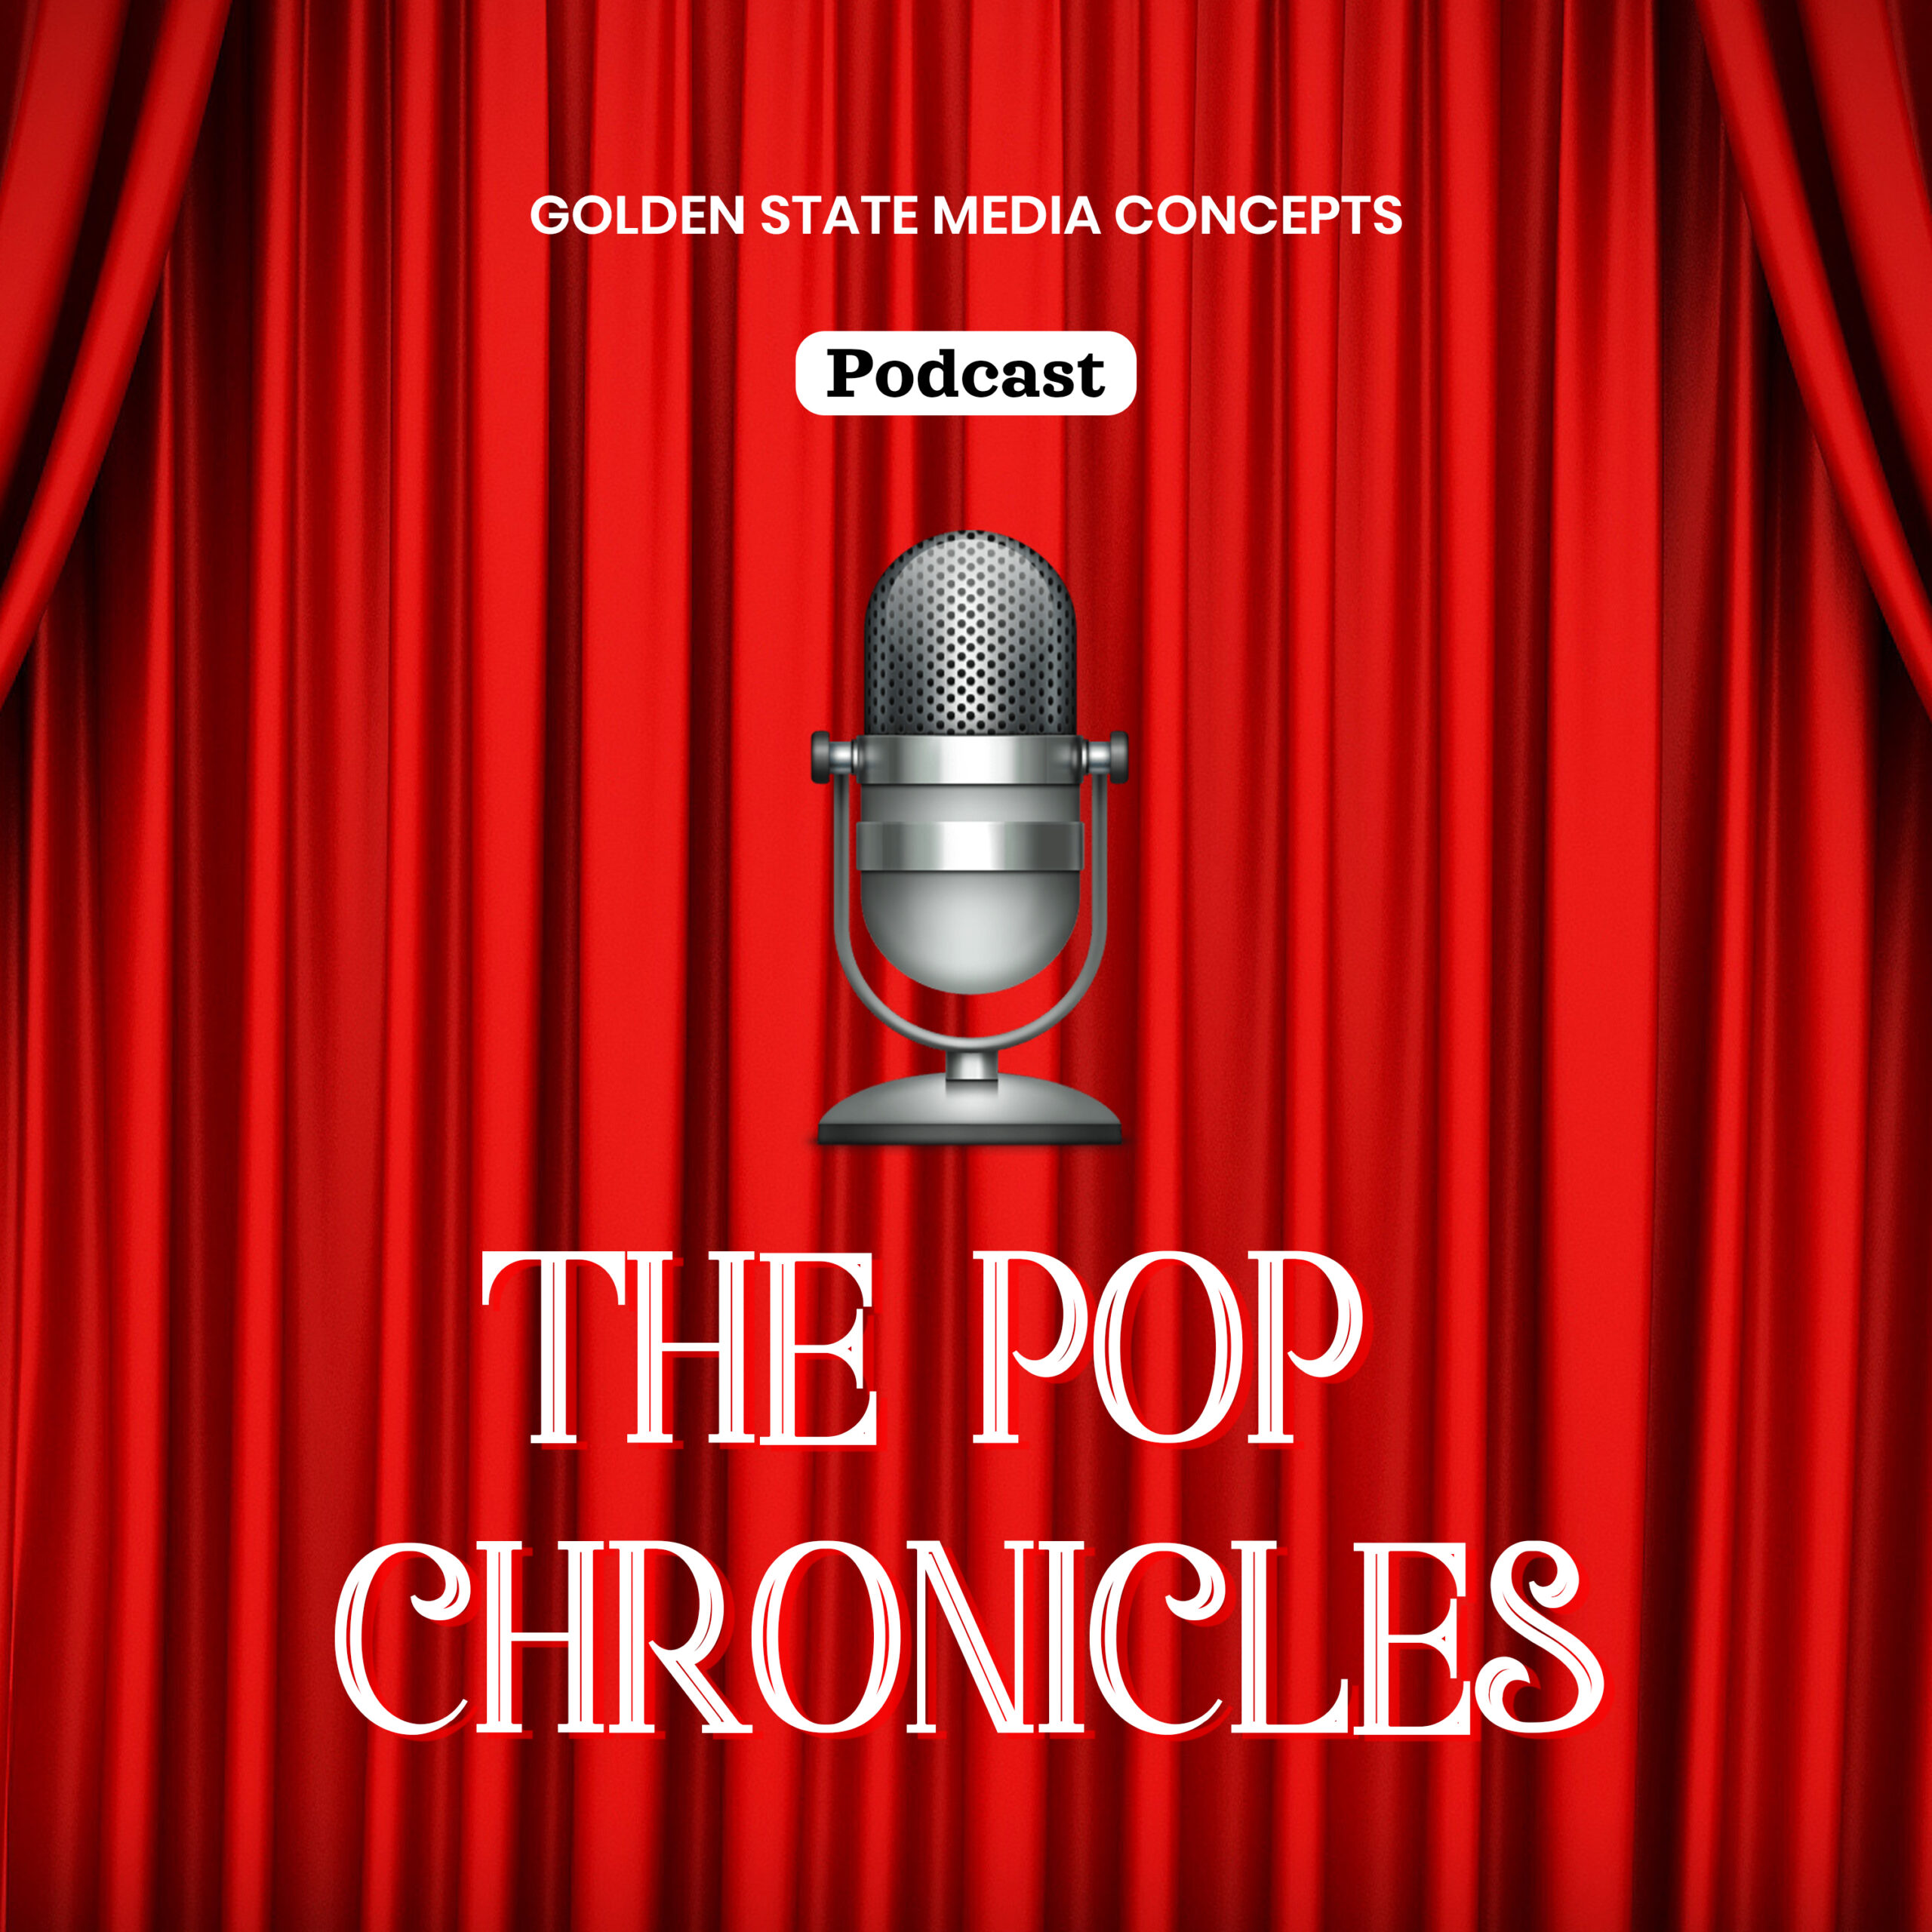 The Pop Chronicles